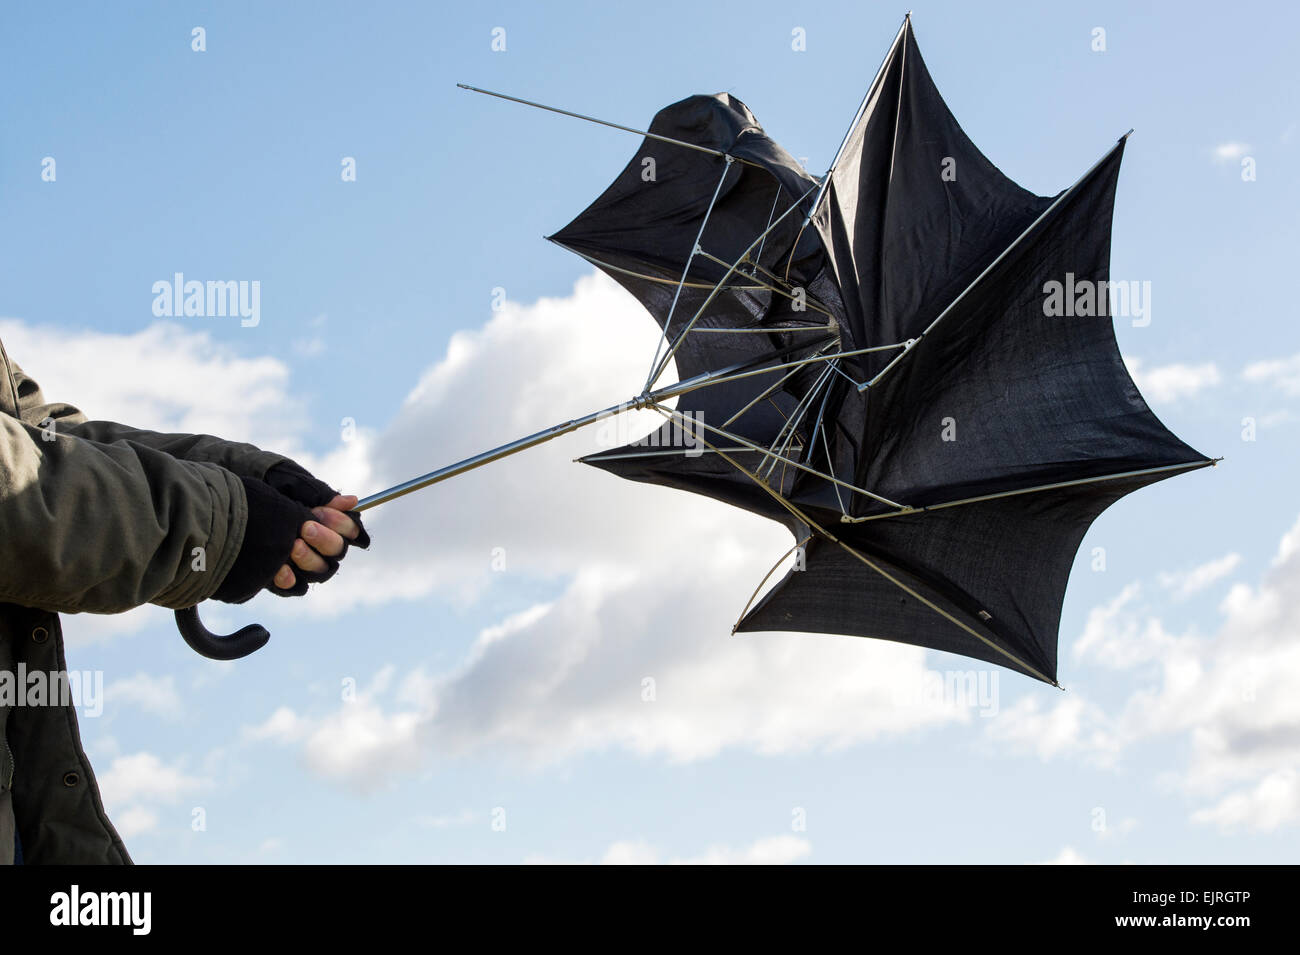 Man holding an umbrella in gale force winds Stock Photo